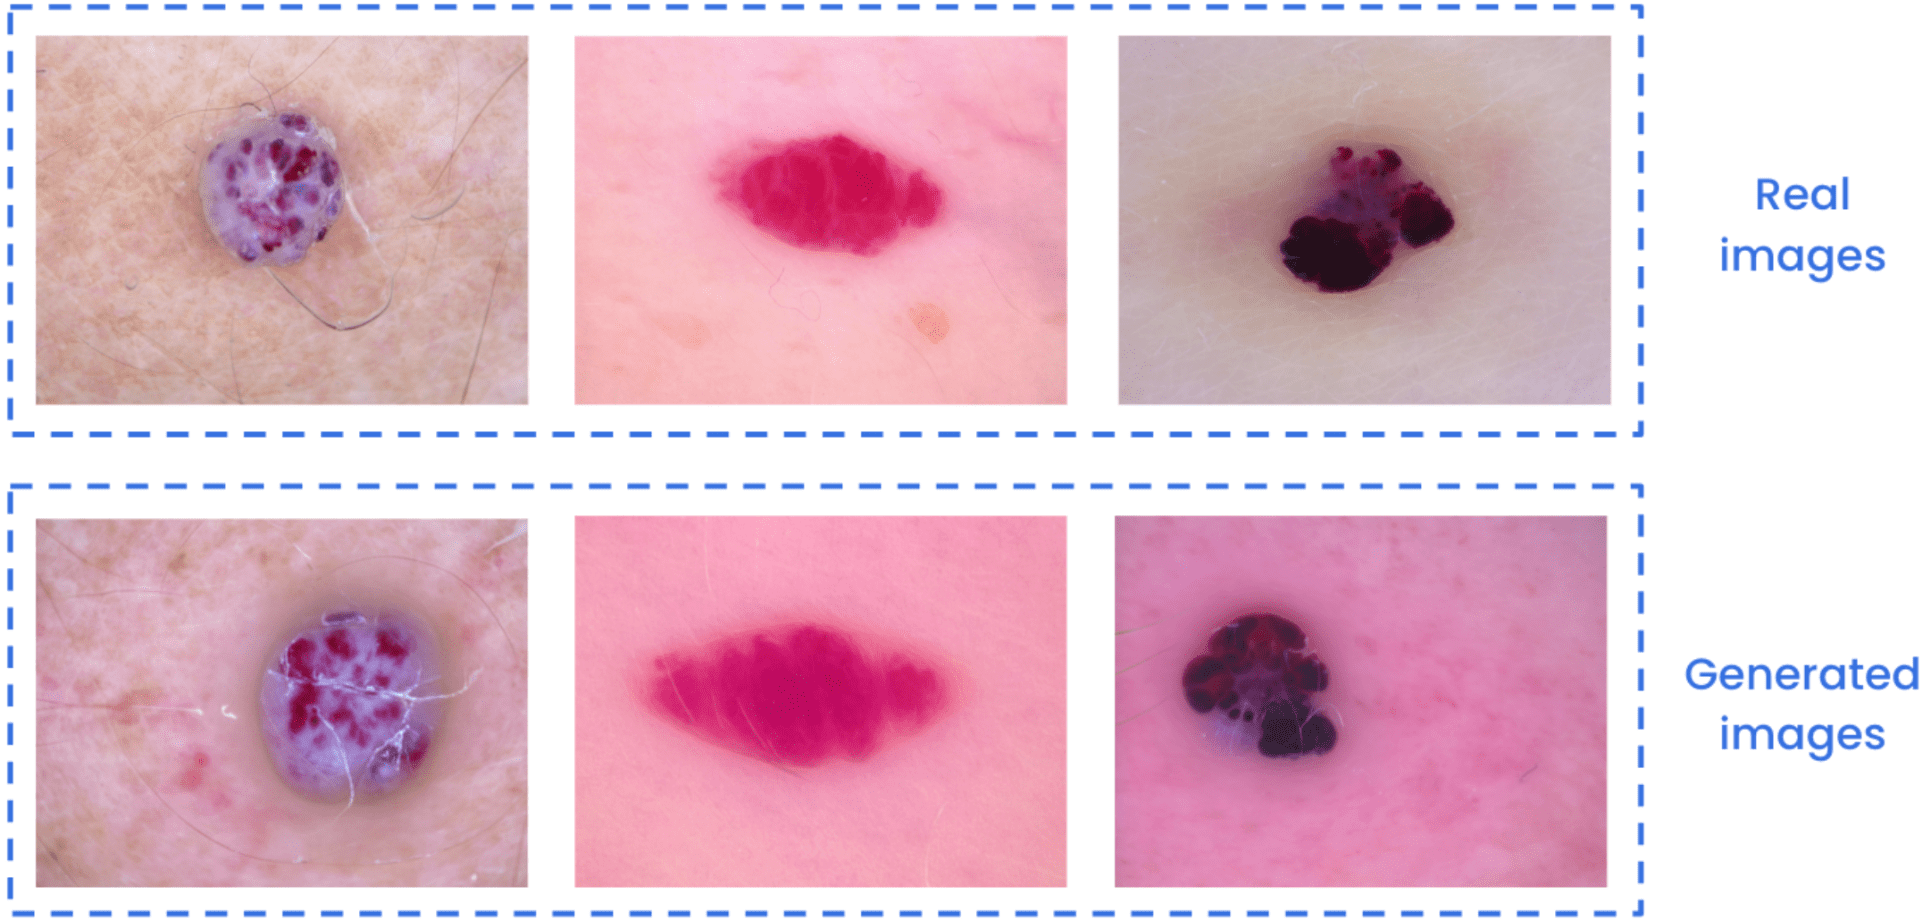 Vascular skin lesion generation with Diffusion